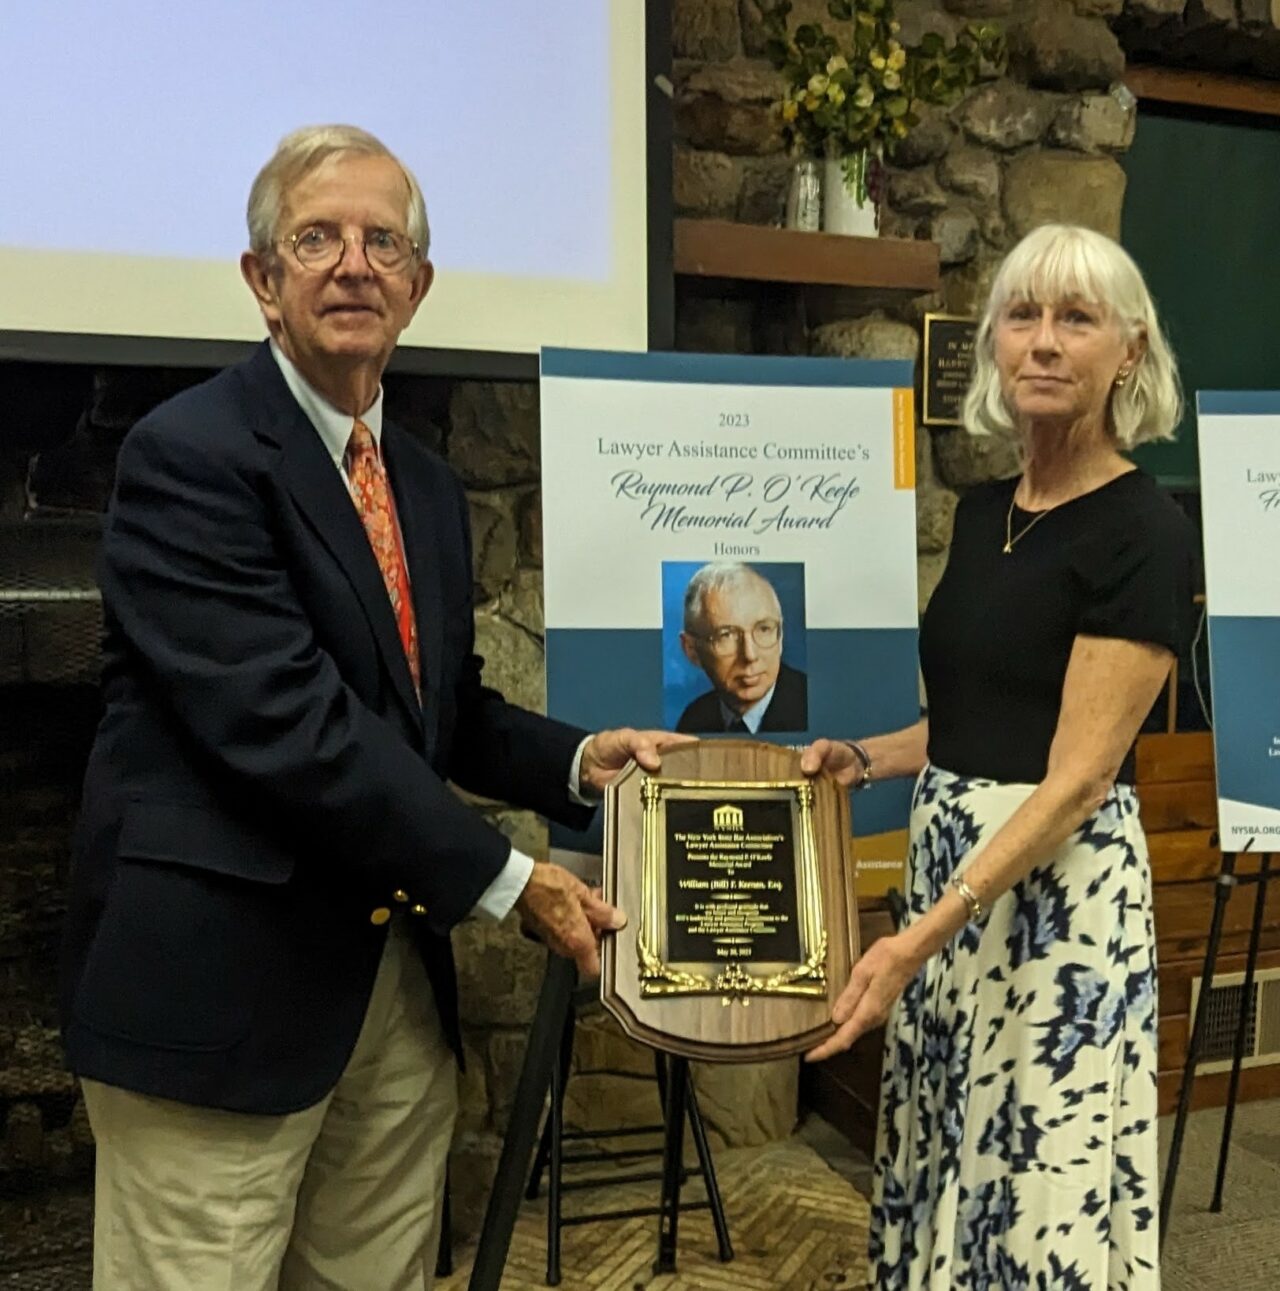 David Pfalzgraf, former chair of the Lawyer Assistance Committee, presented the Raymond P. O’Keefe award to Mary Clare Keenan, who accepted in honor of her father Bill Keenan.